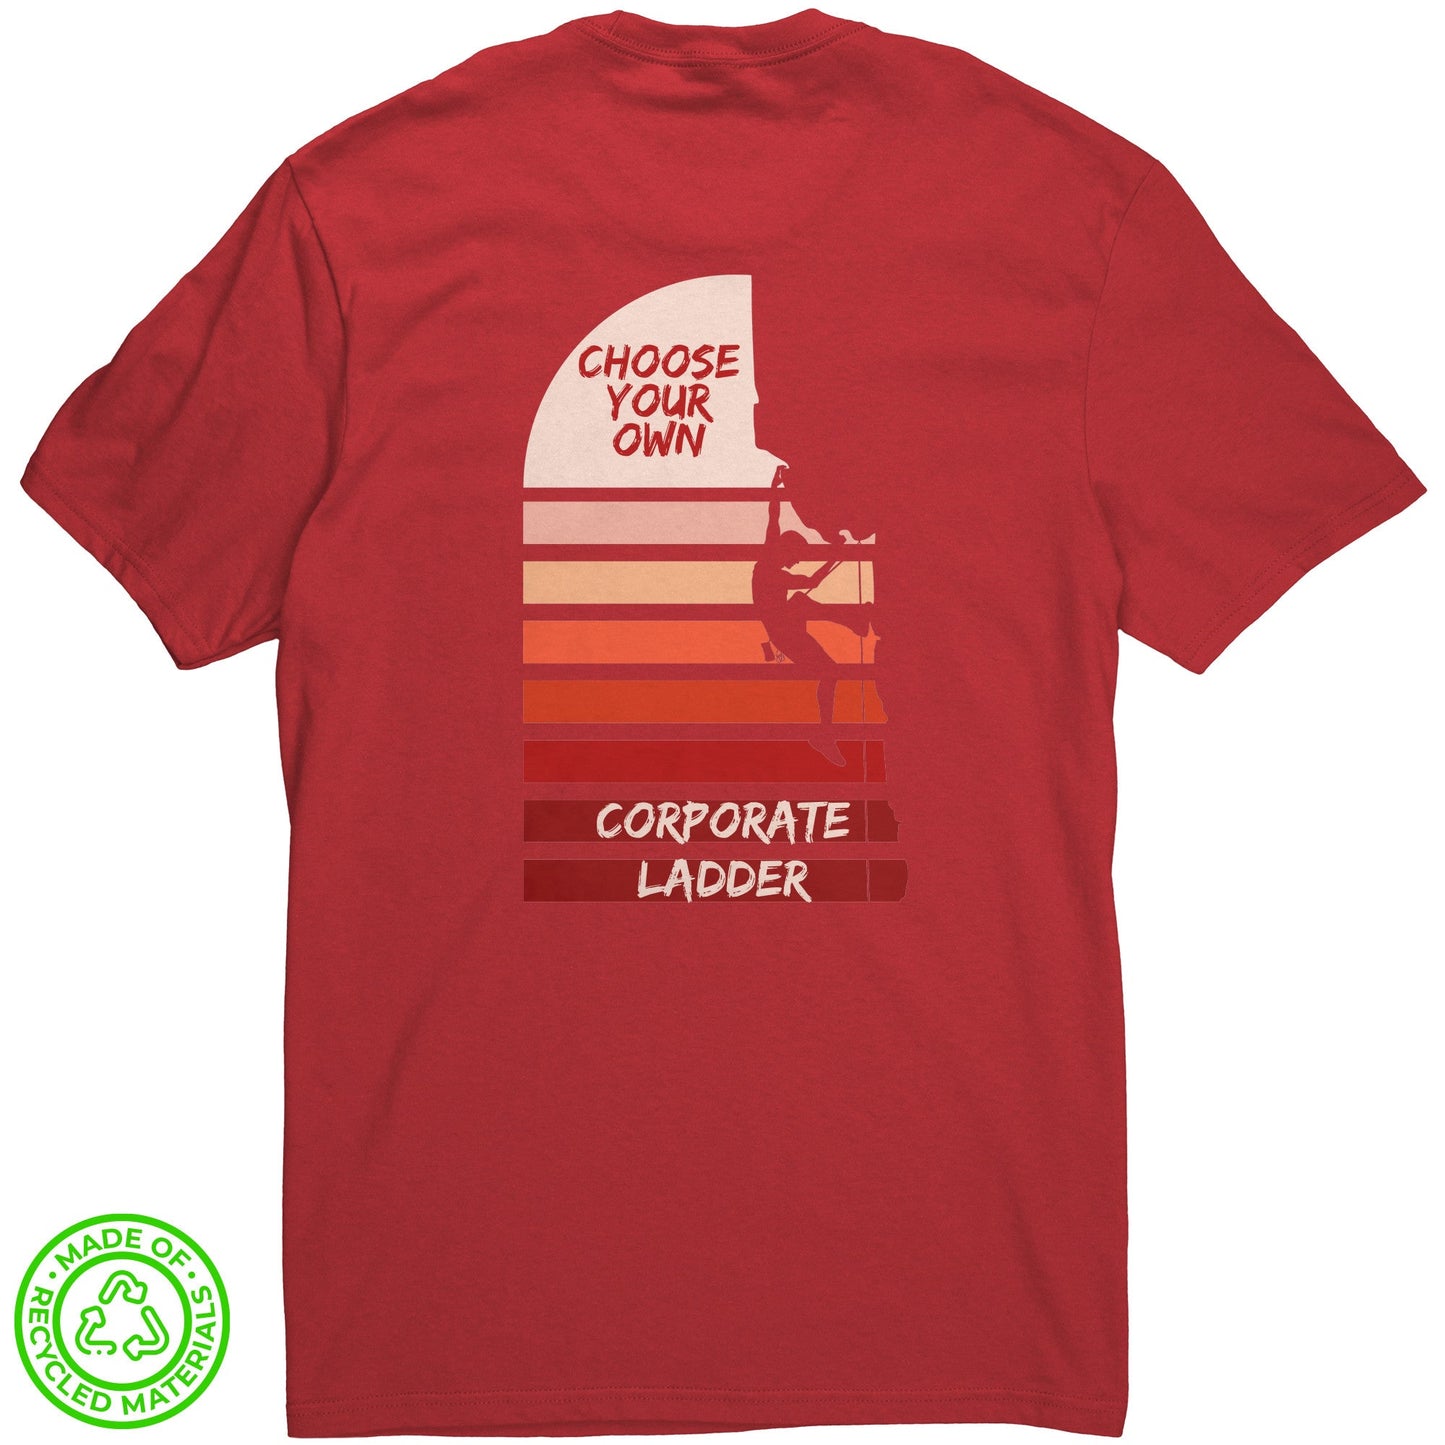 Eco-friendly Re-Tee (Choose Your Own Corporate Ladder)